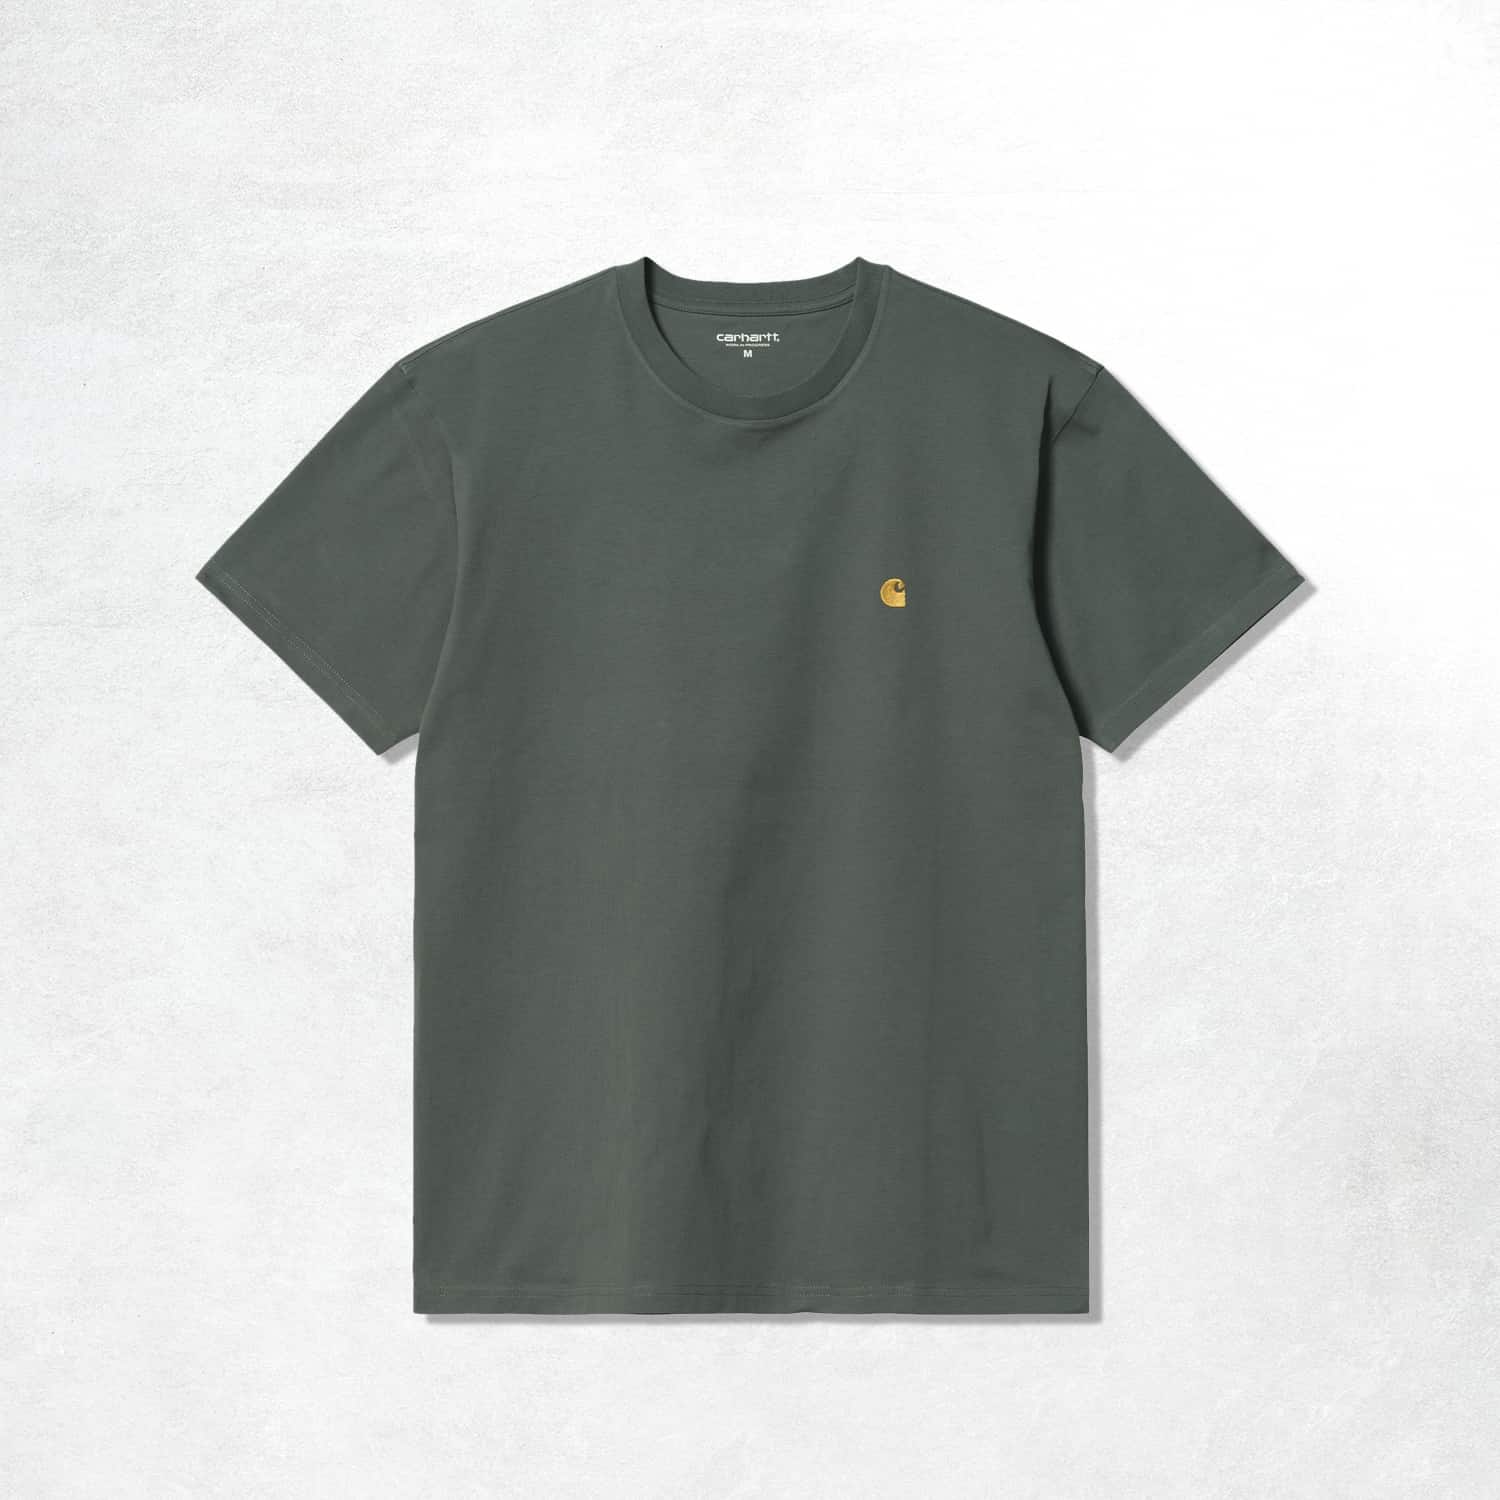 Carhartt WIP S/S Chase T-Shirt: Jura / Gold (Front)